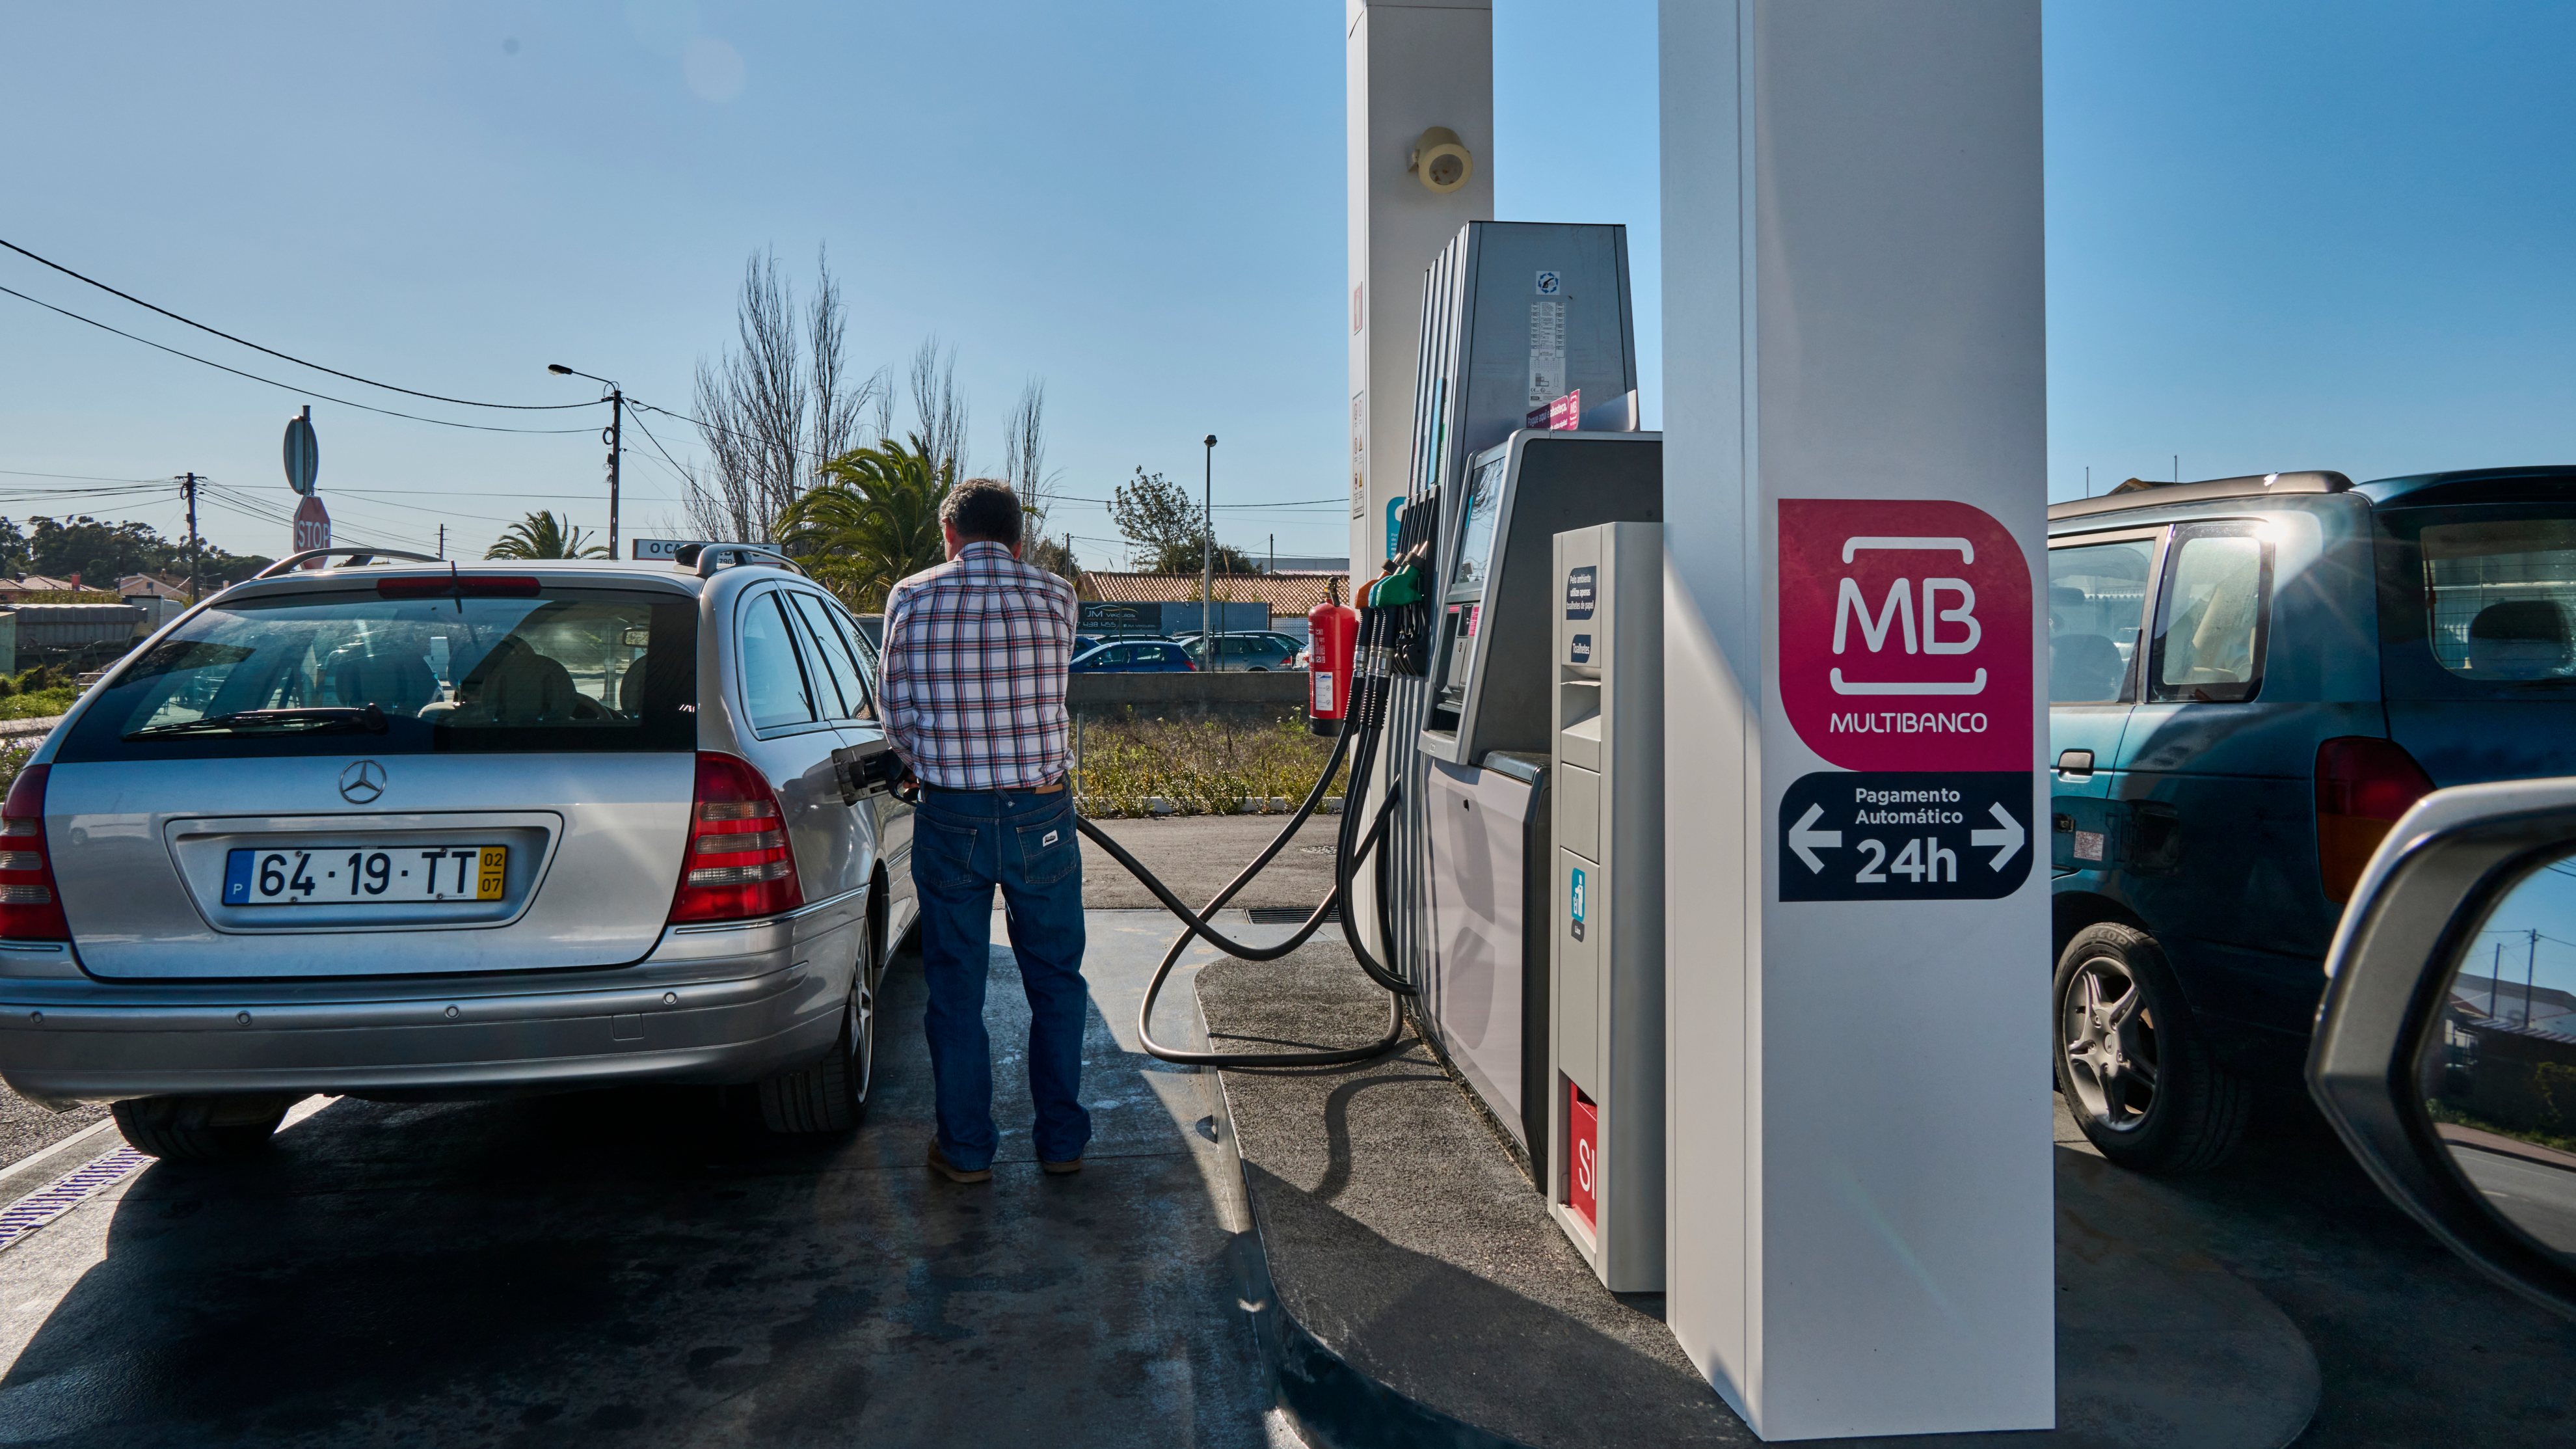 Portugal Suffers Fuel Prices Increase Due To The Ukrainian Conflict, Drought And Pandemic